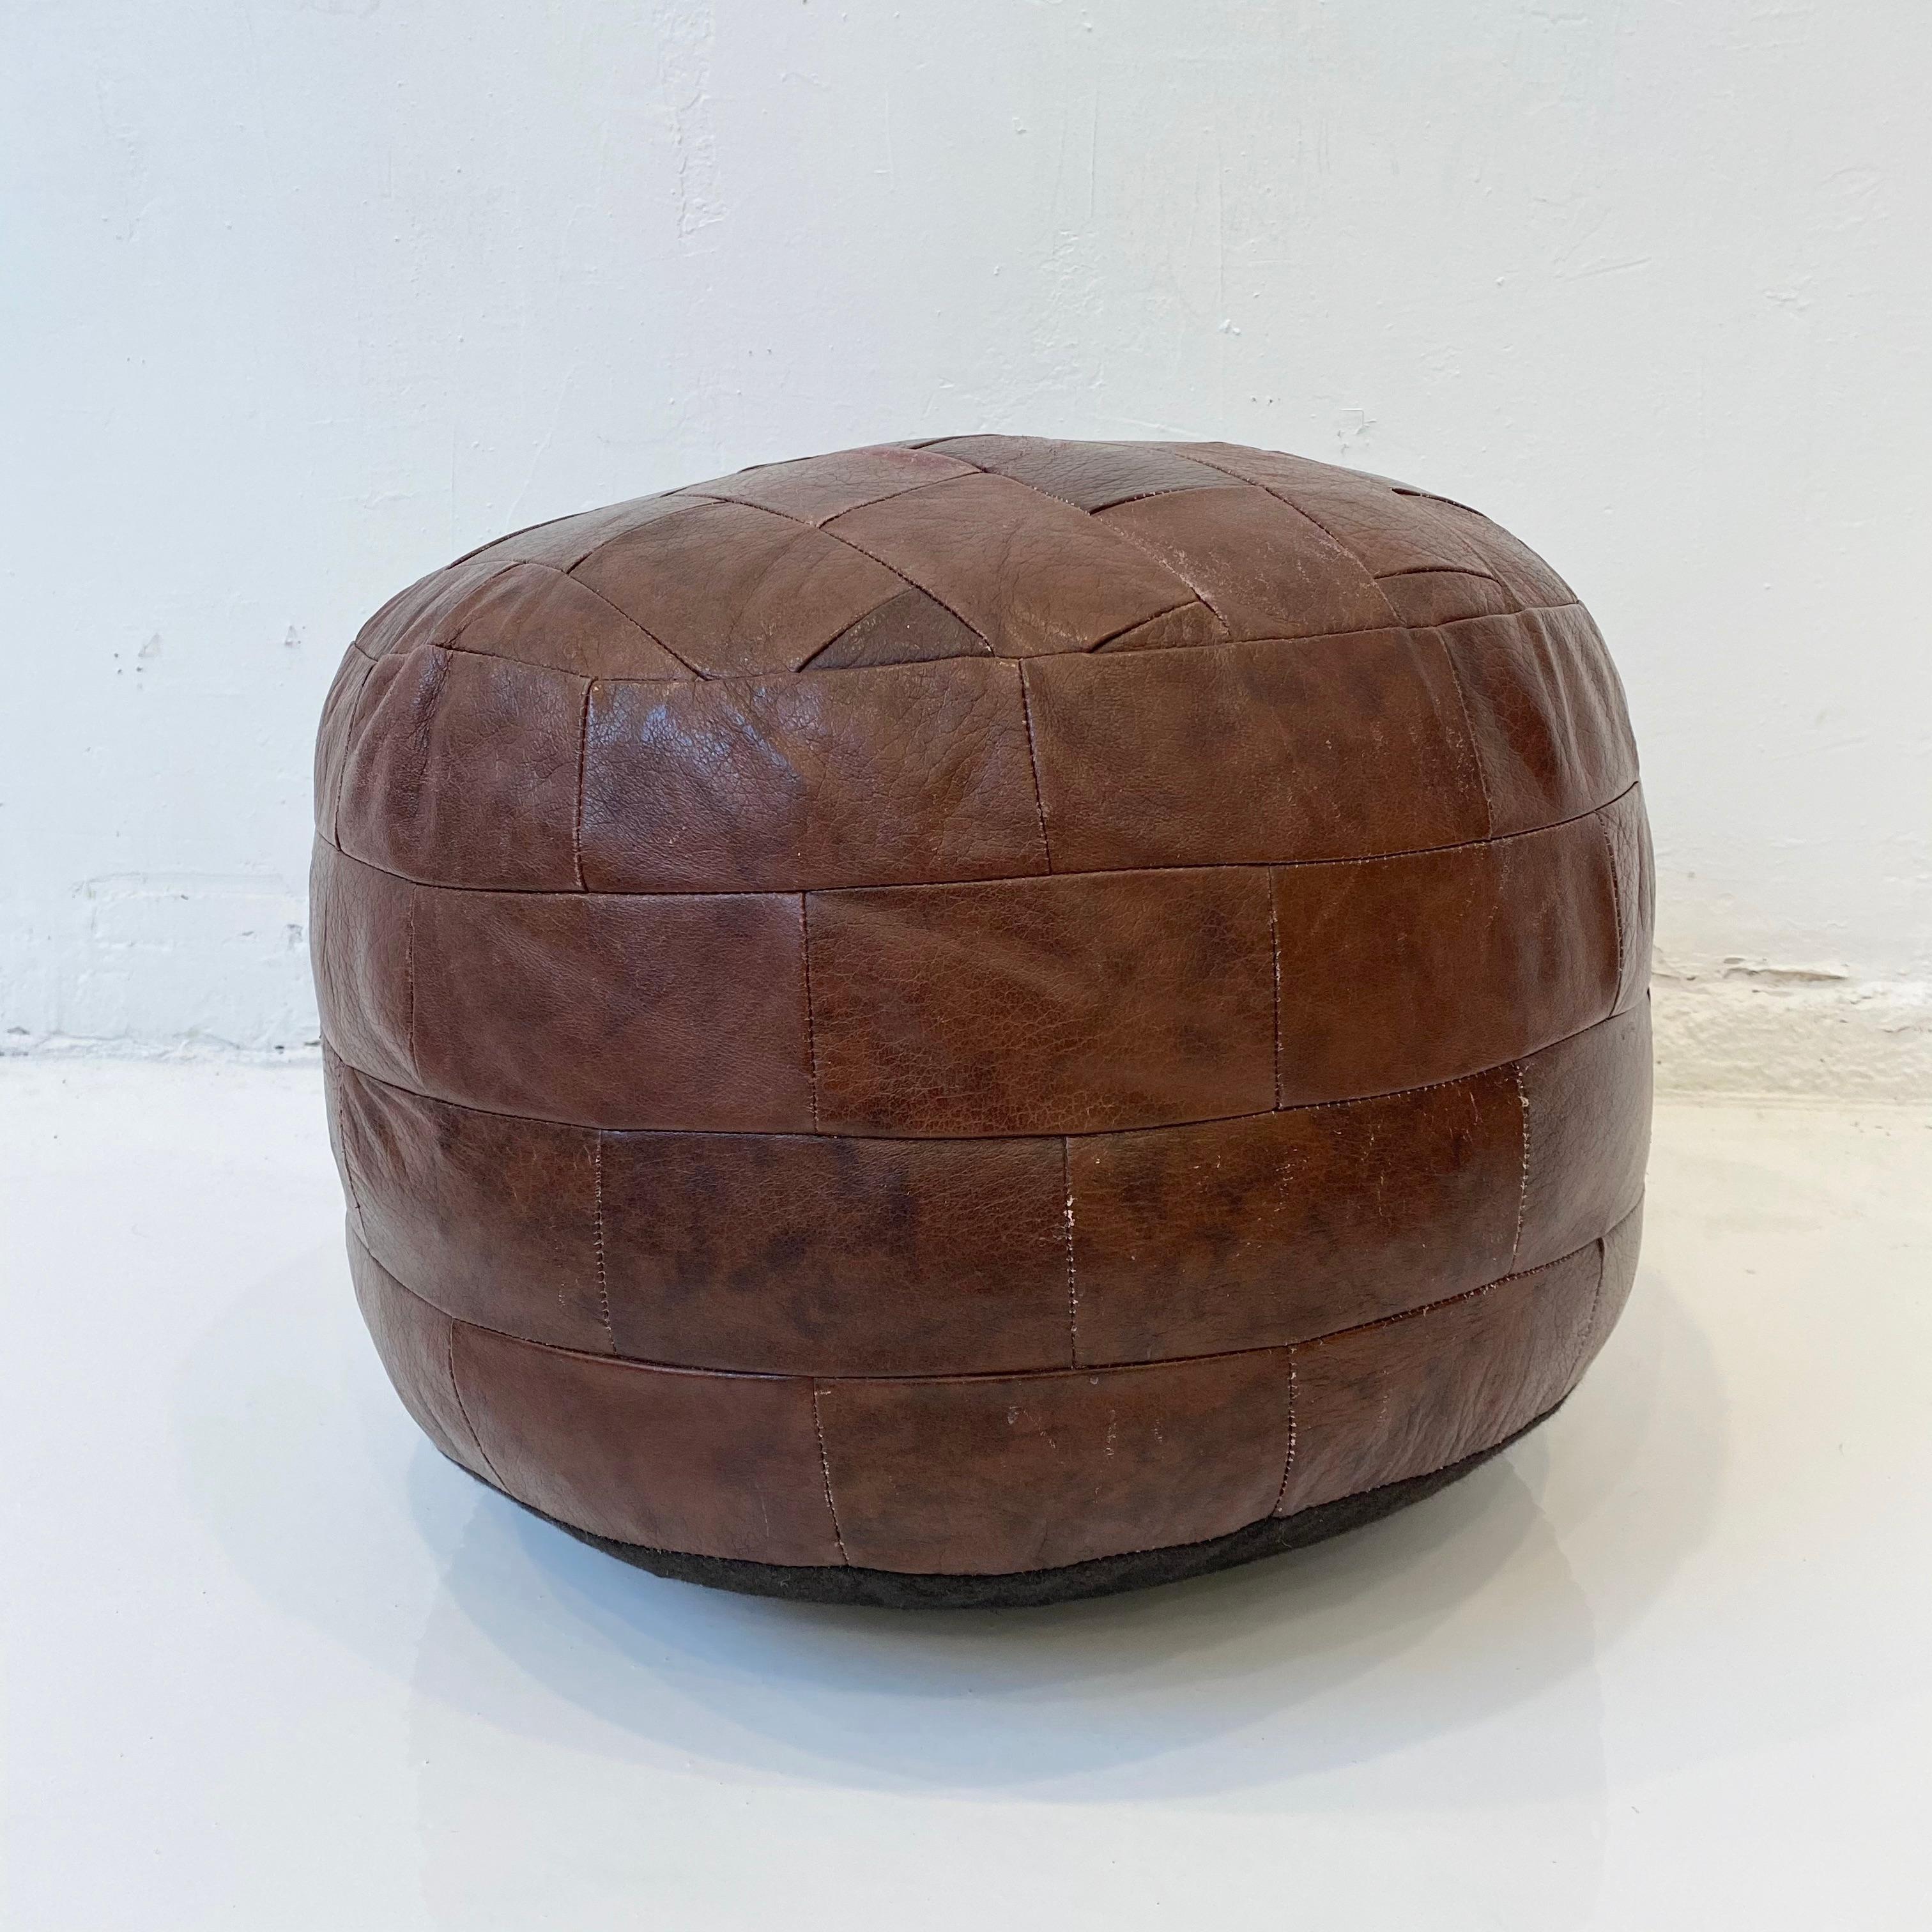 Gorgeous reddish brown patchwork leather pouf by De Sede. Great coloring and patina to leather with various browns. Perfect accent piece.

   